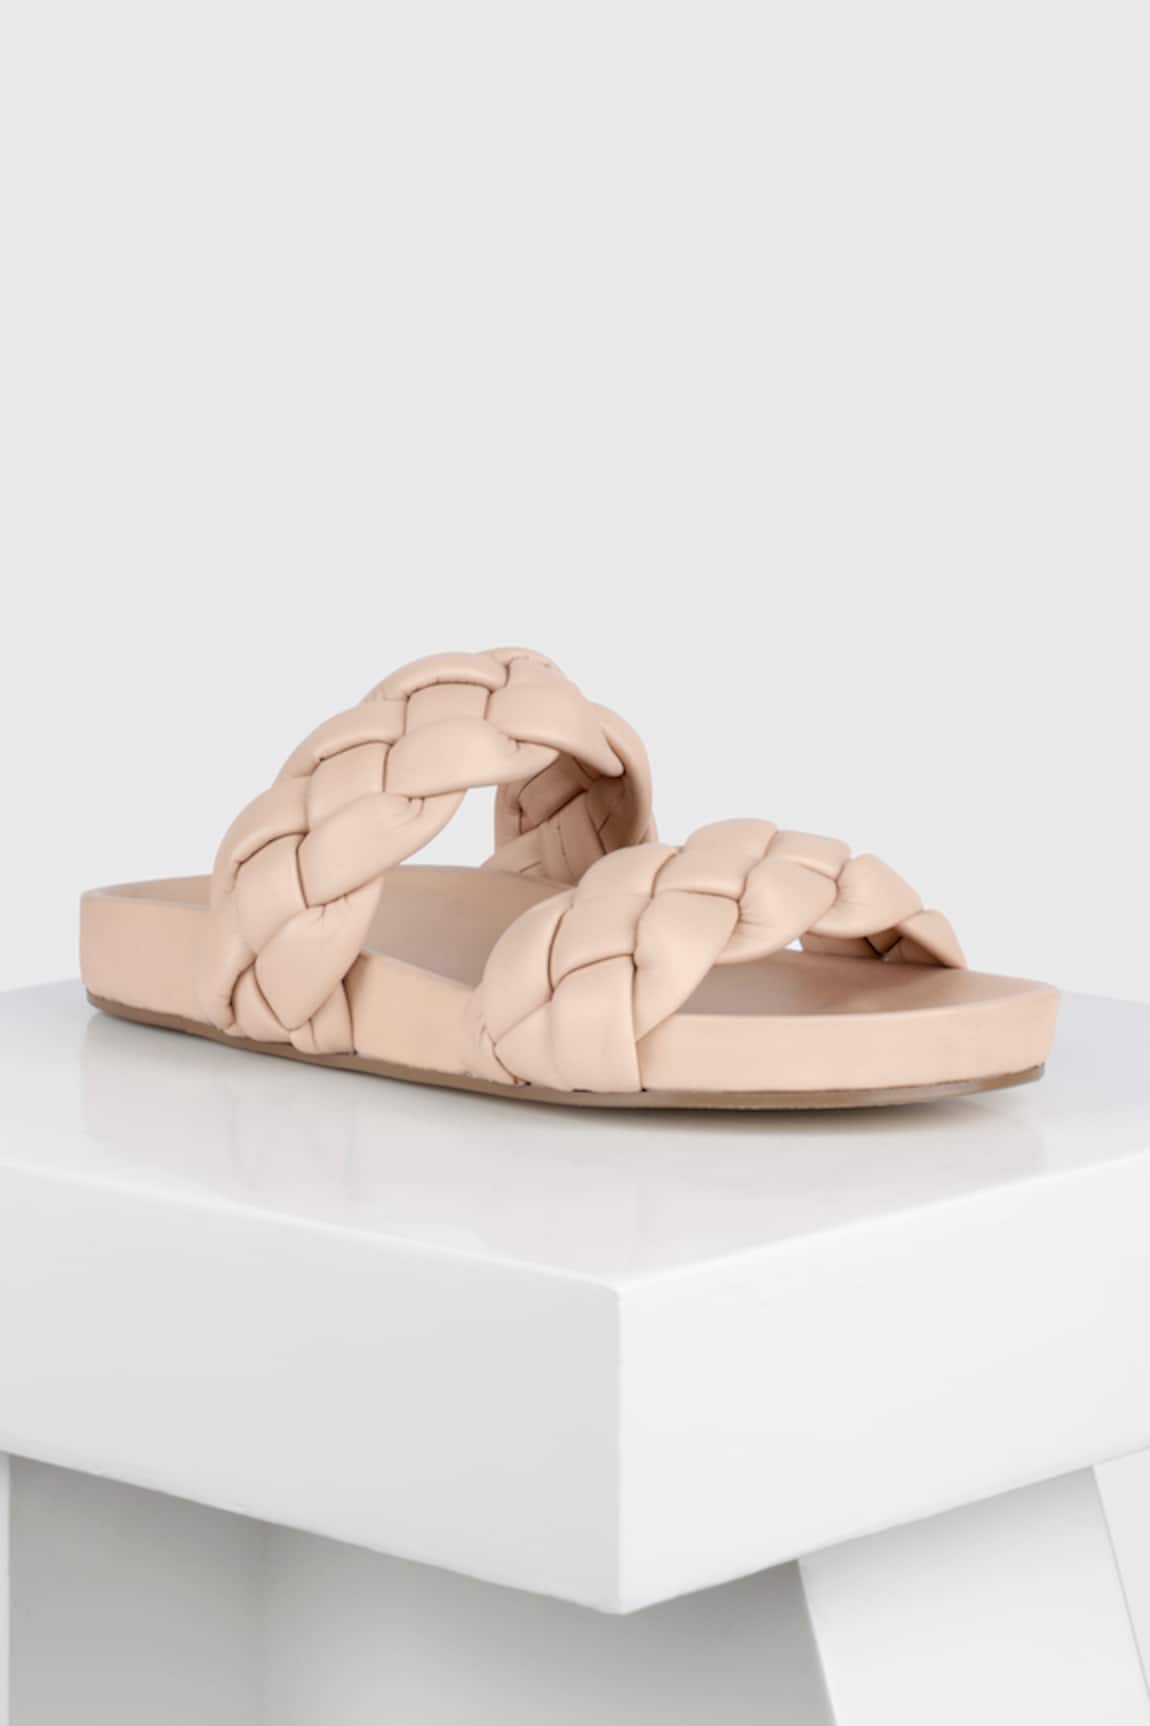 OROH Parla Basket Weave Double Strap Sliders